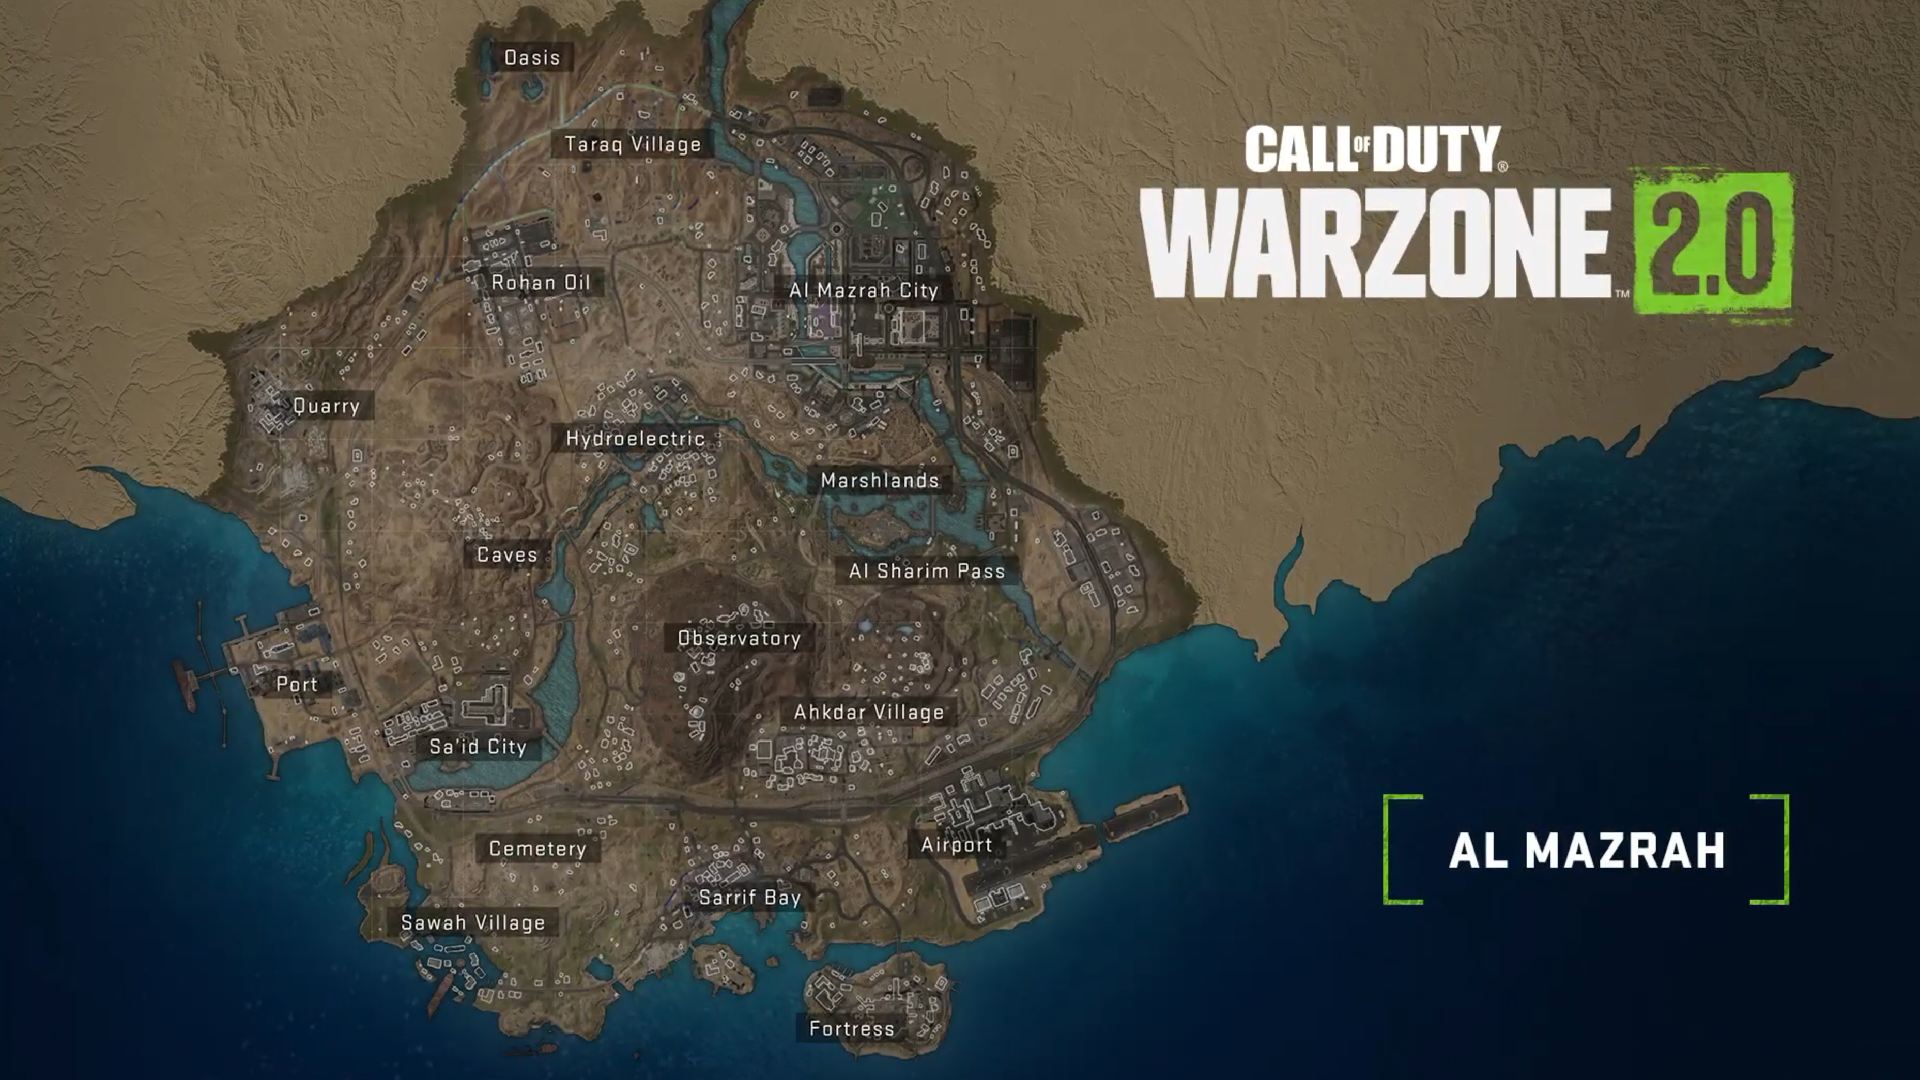 Warzone 2 Map: The Warzone 2 map with all the POI locations can be seen